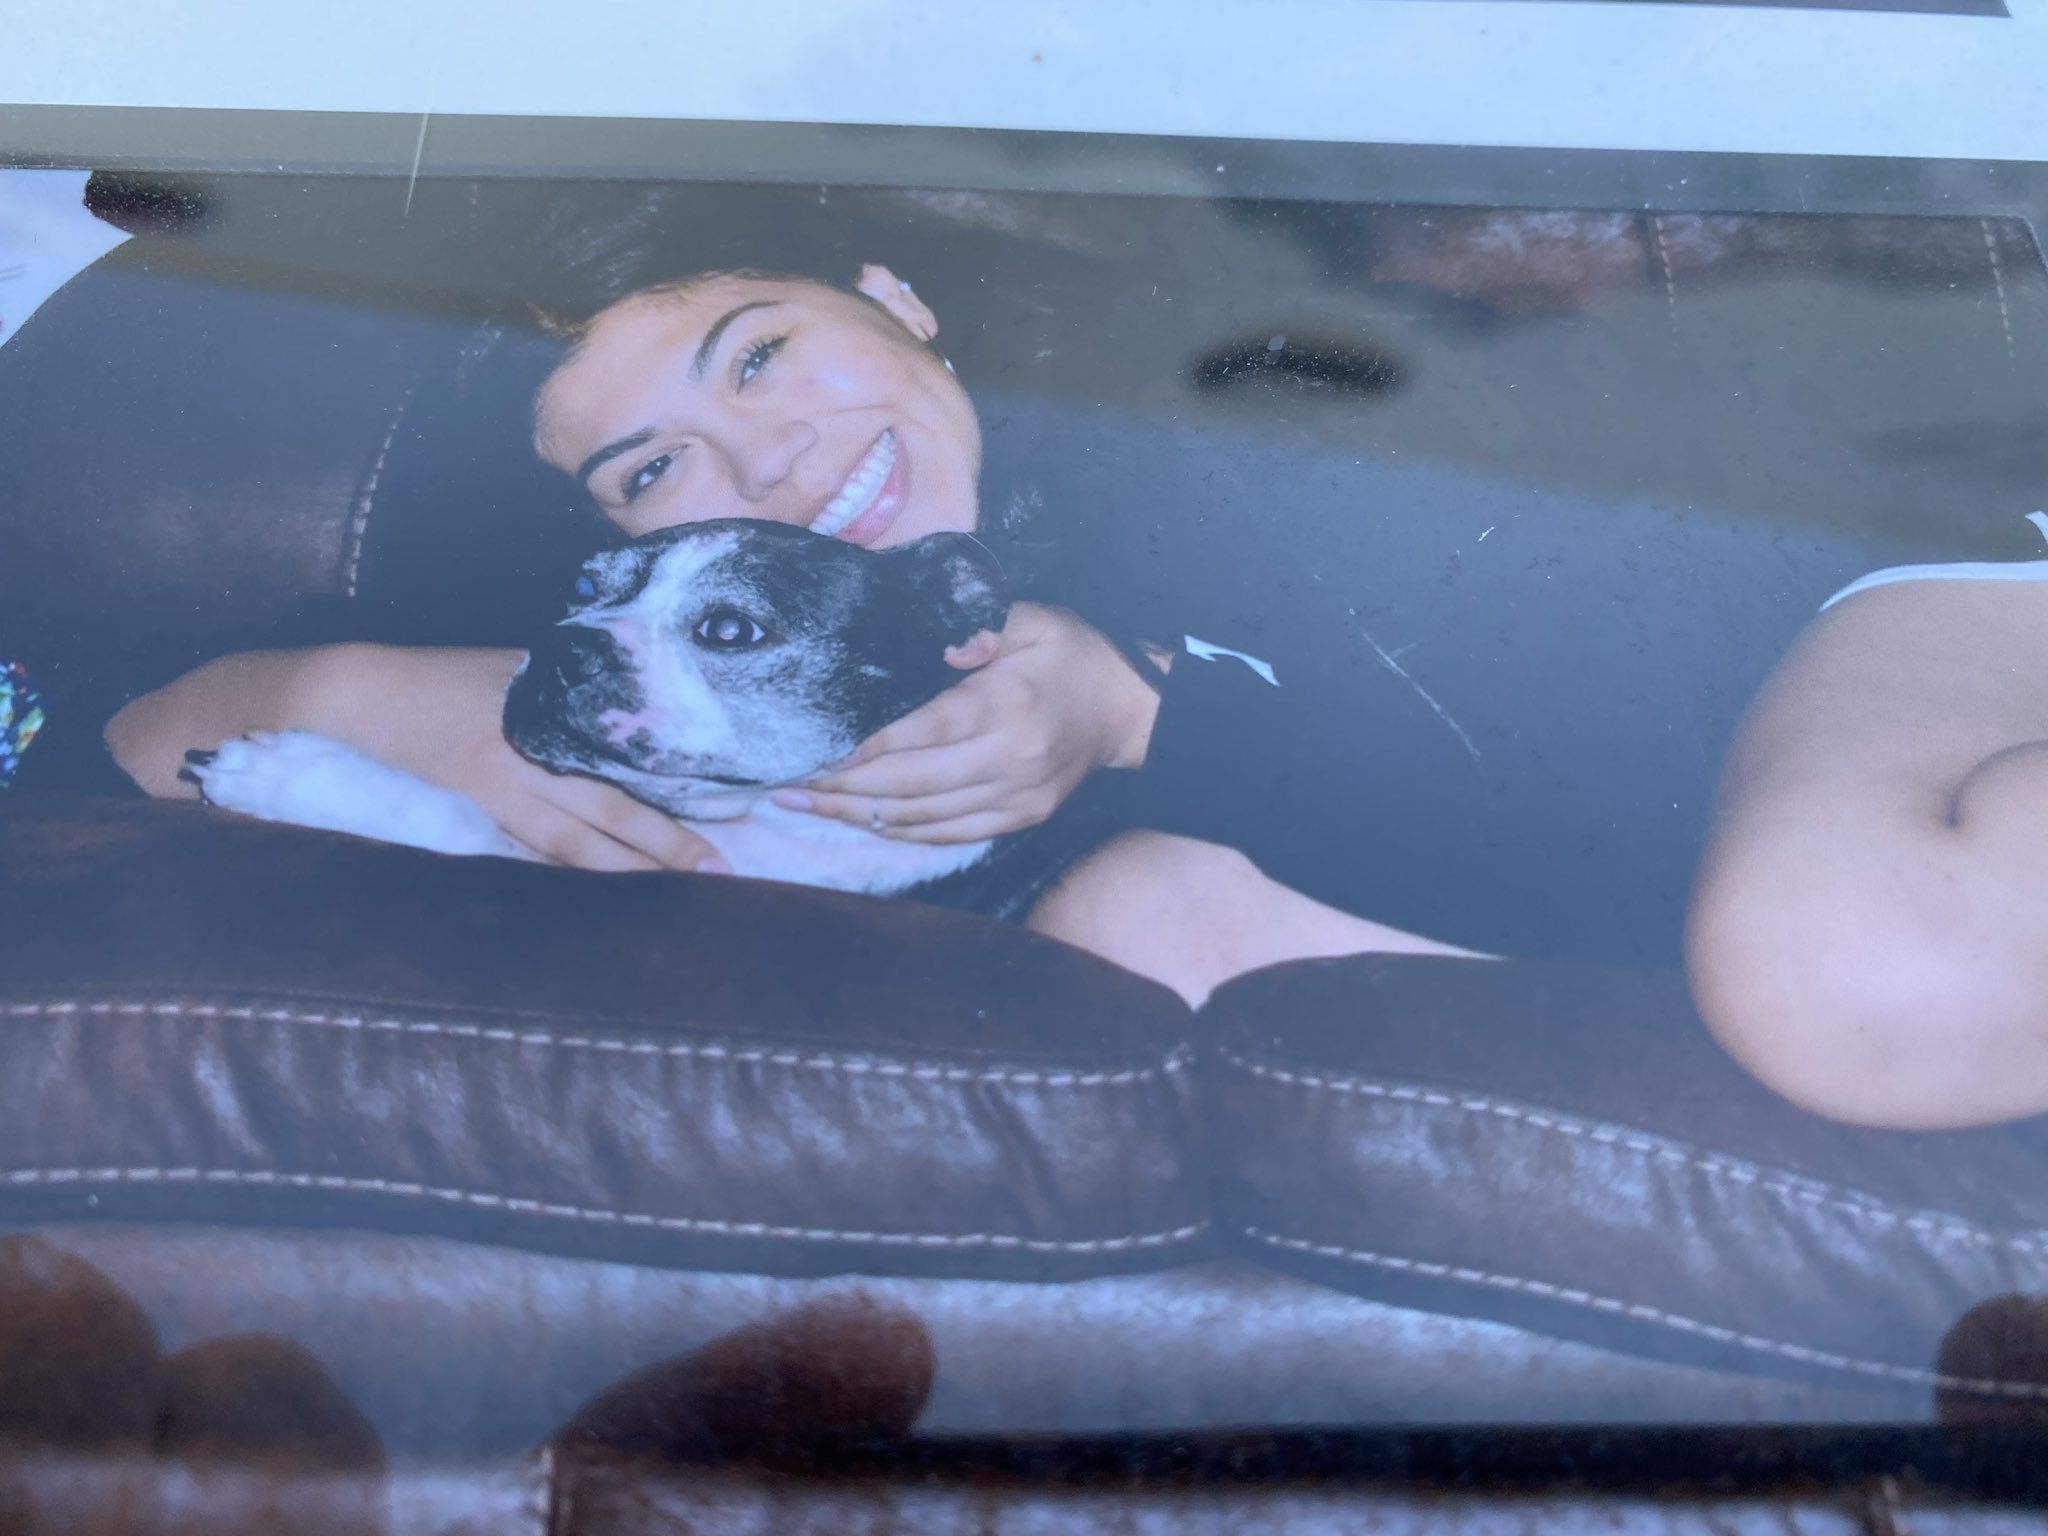 17-year-old Sophia Hernandez from Eagle Mountain went missing after she went tubing on Utah Lake on Wednesday. (Utah County Sheriff's Office)